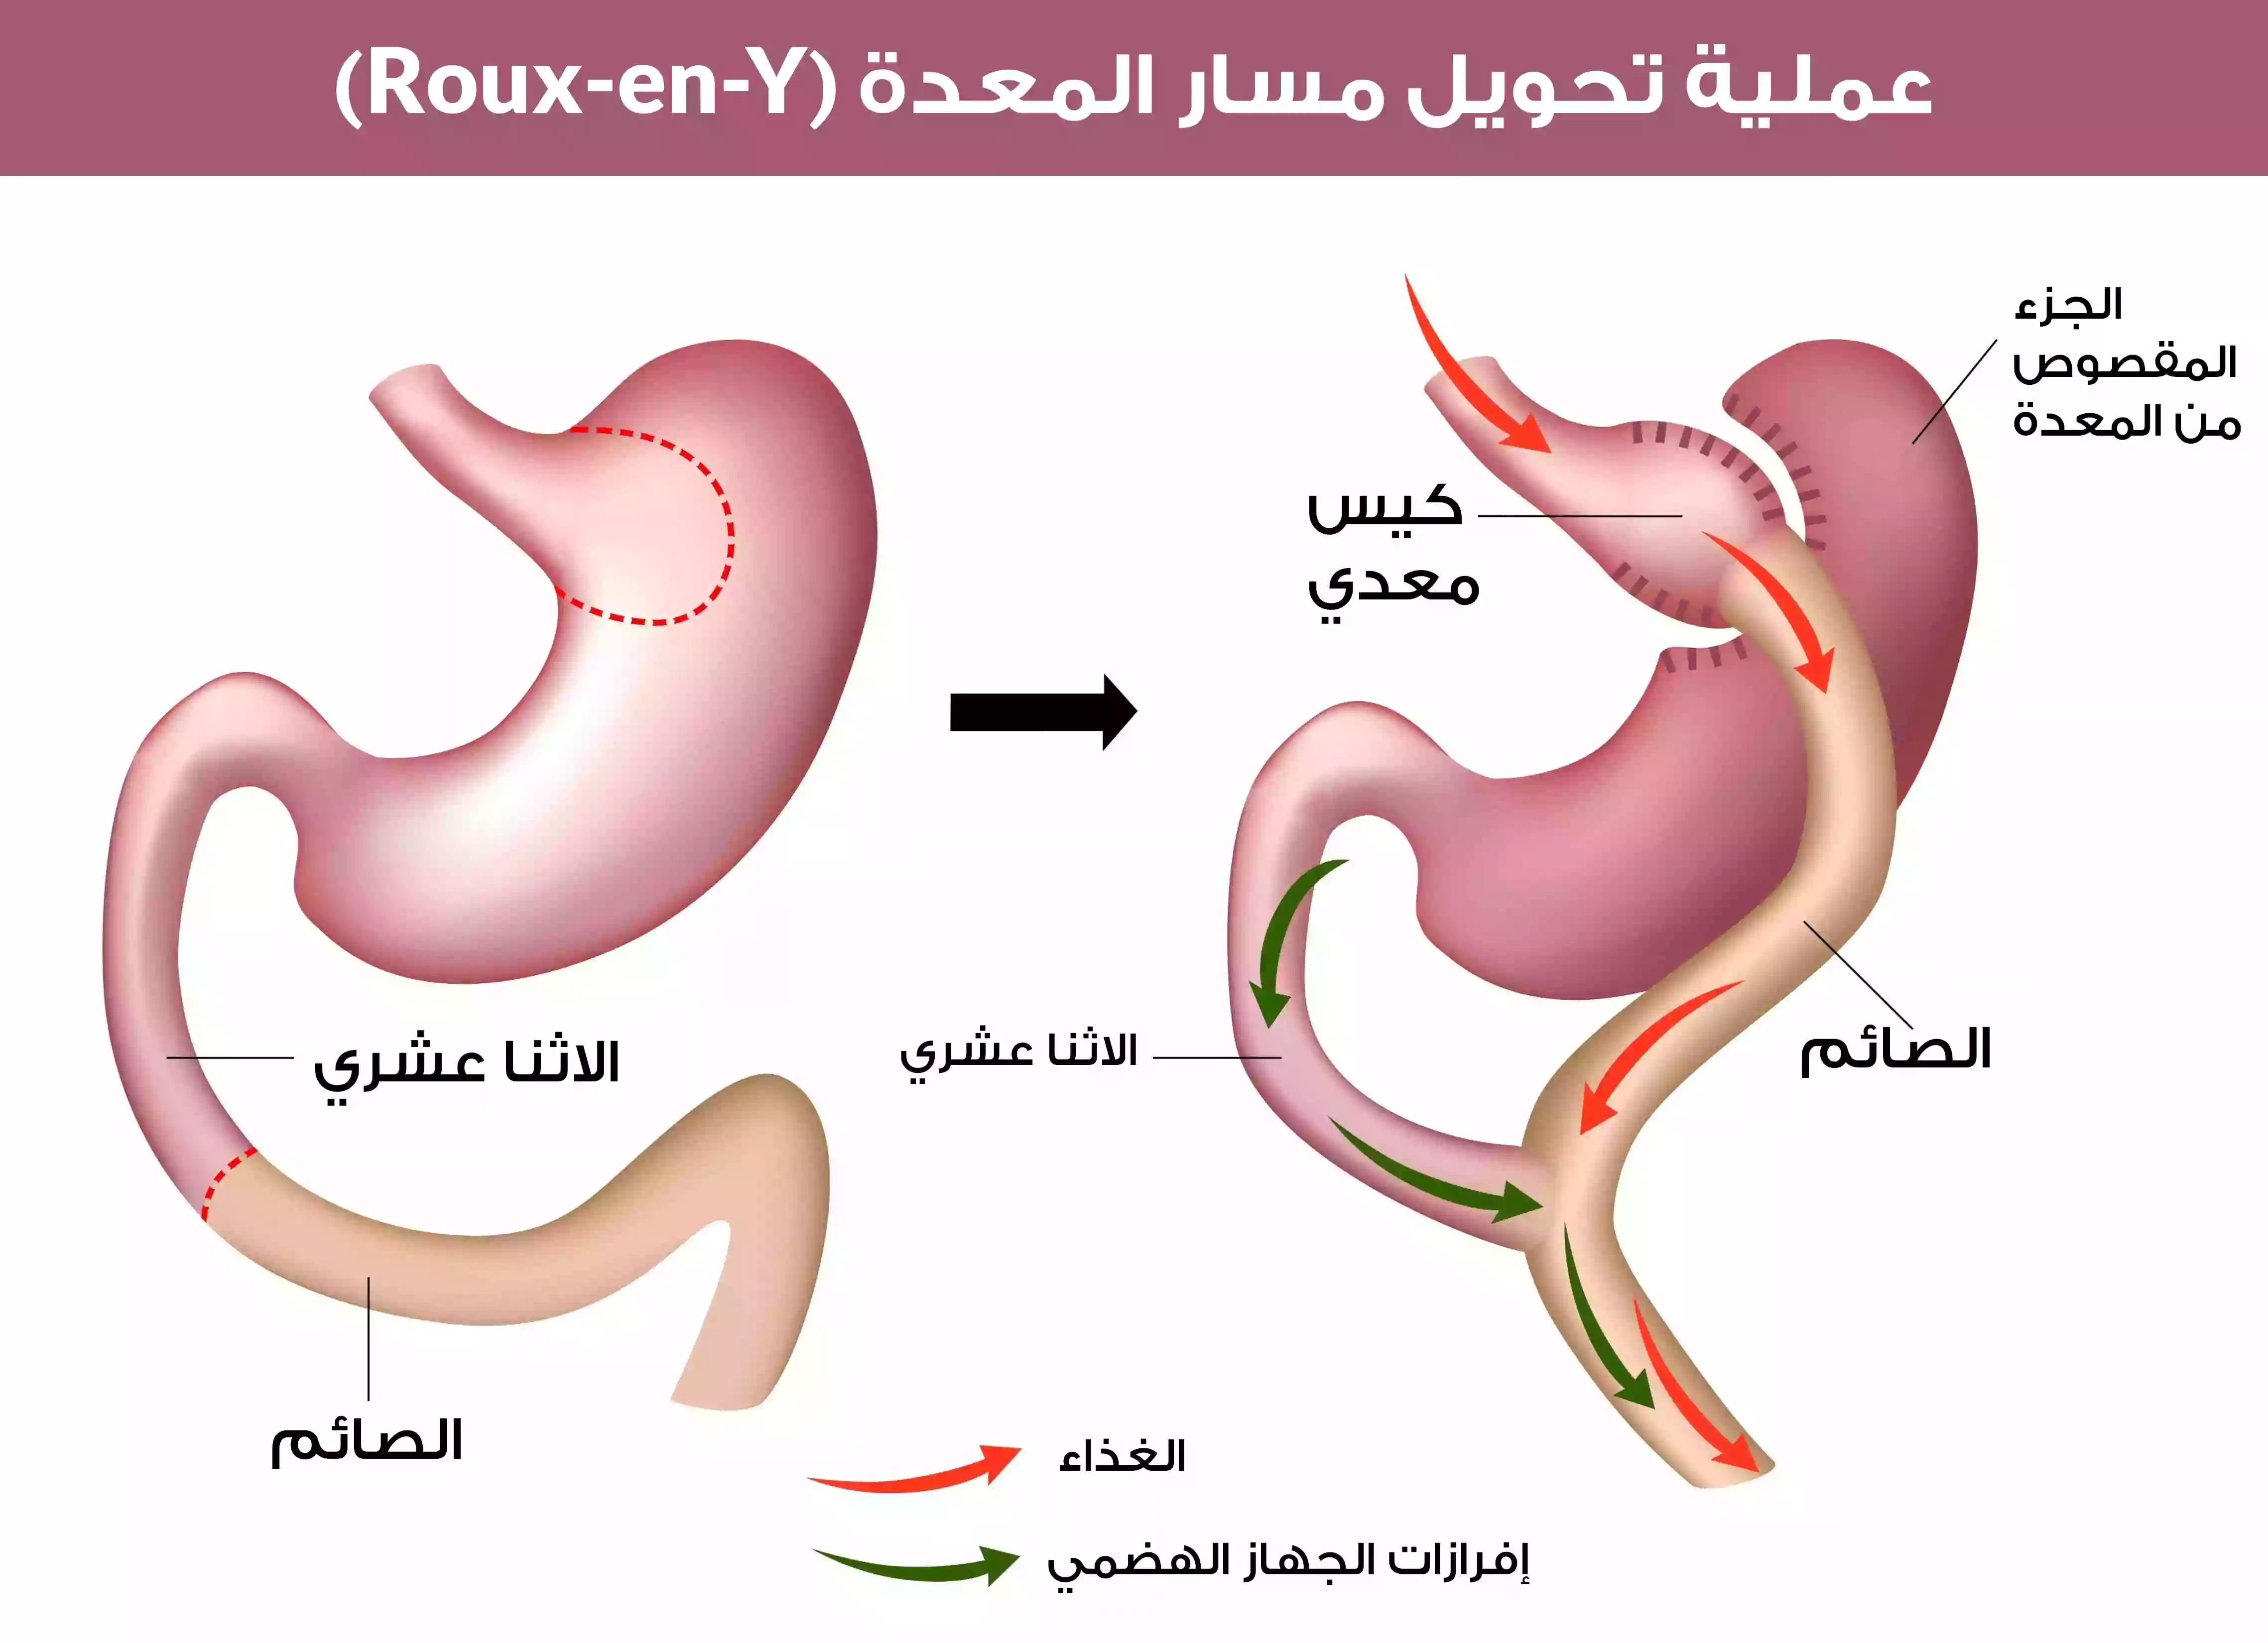 Gastric bypass surgery (Roux-en-Y), which is one of the most popular bariatric surgeries